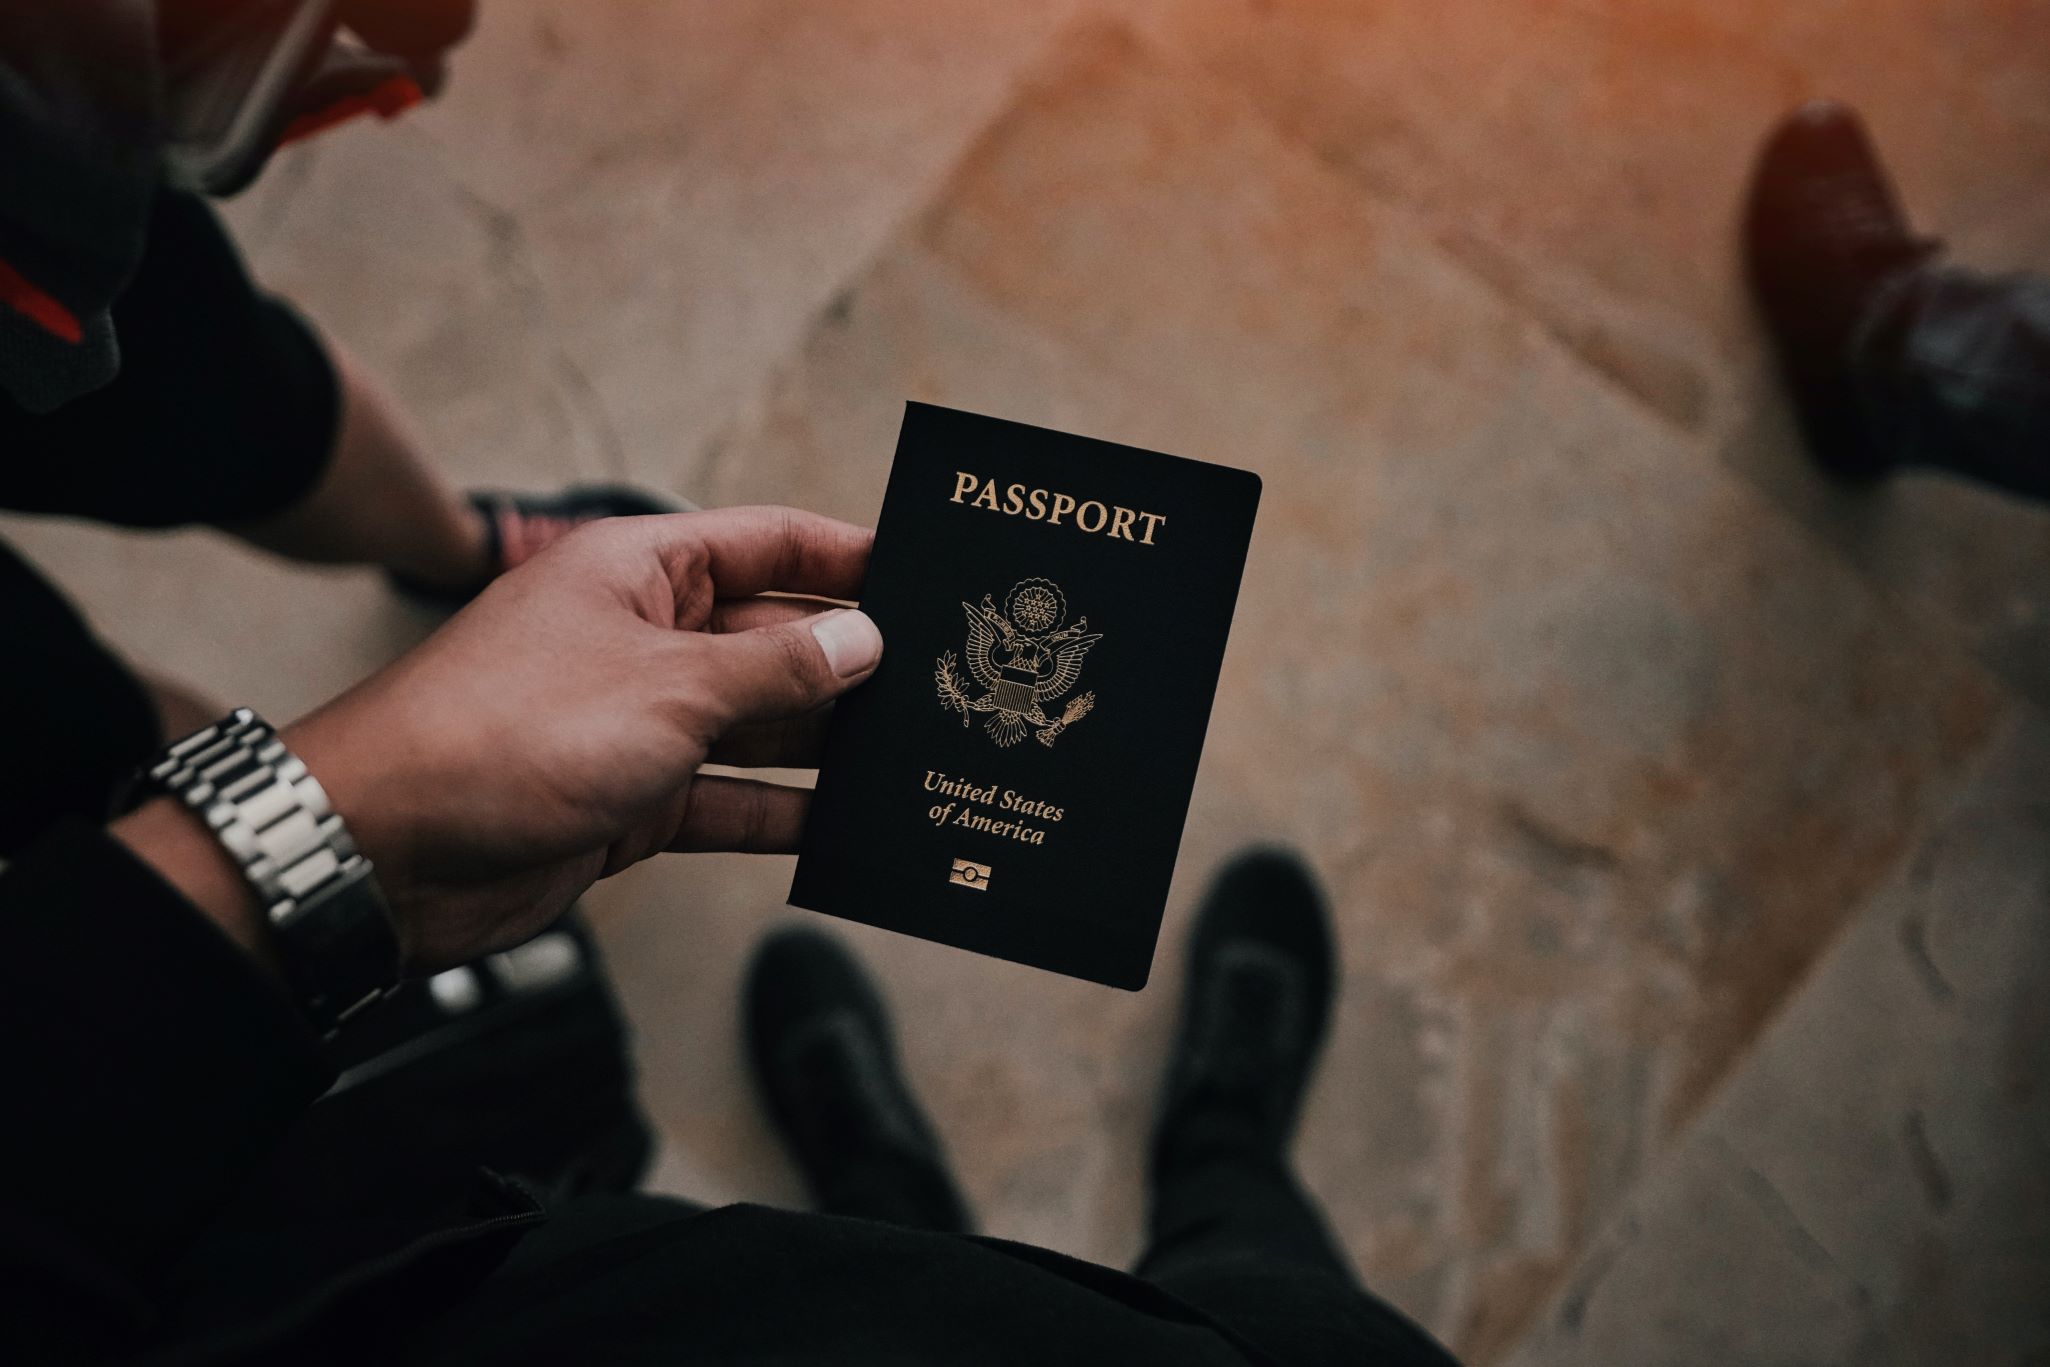 An image of a person holding a passport.